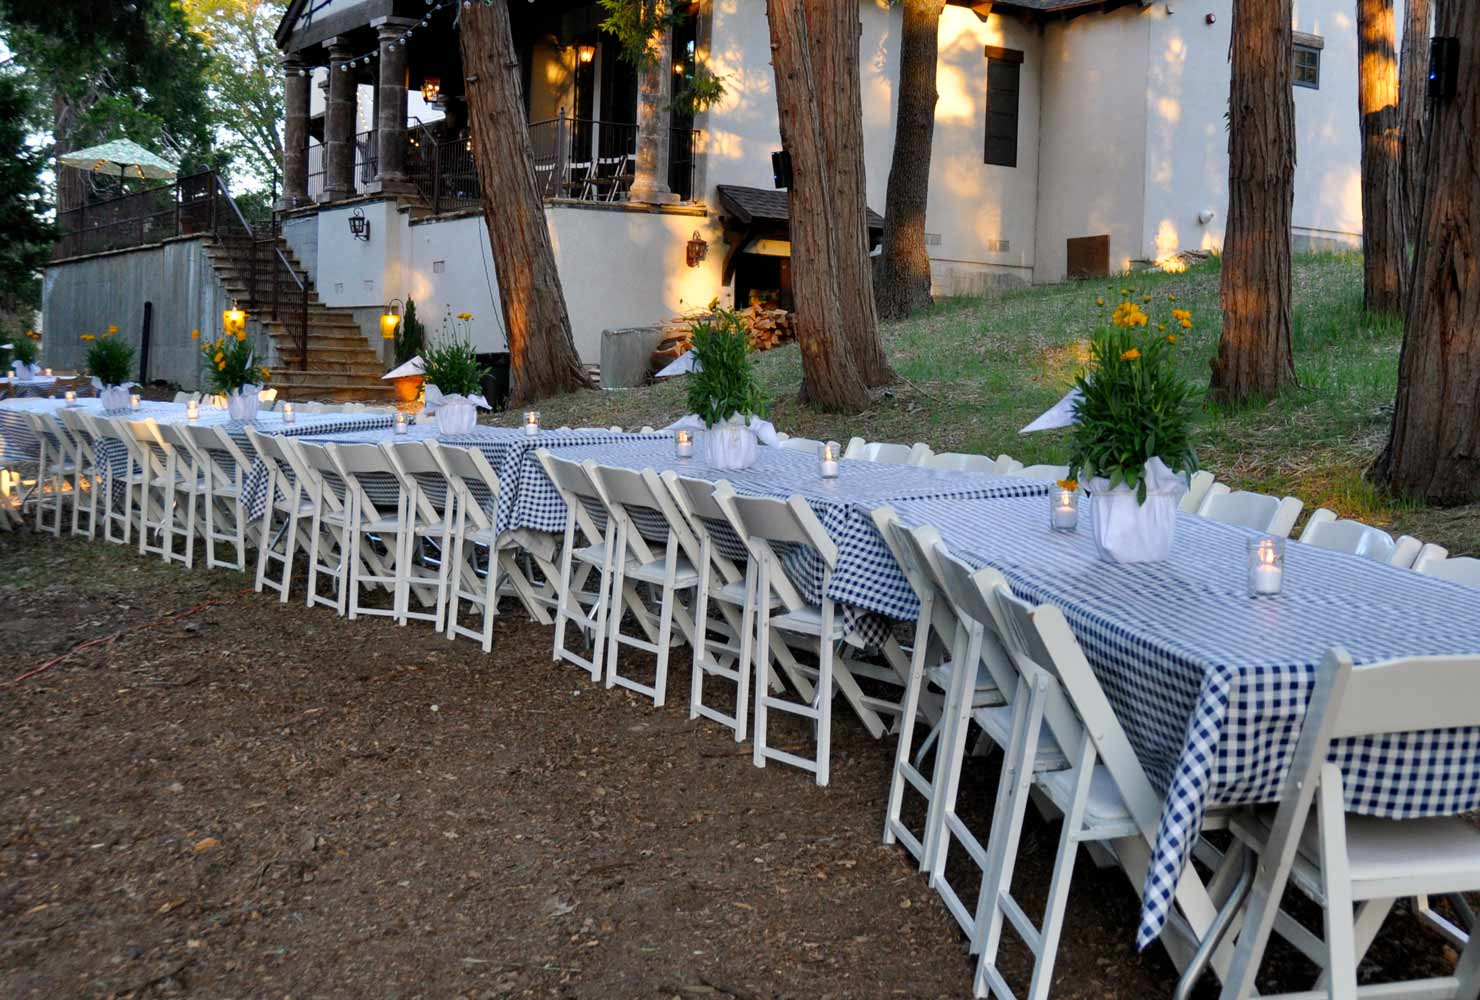 Backyard Graduation Party Ideas
 10 Some of the Coolest Designs of How to Make Graduation